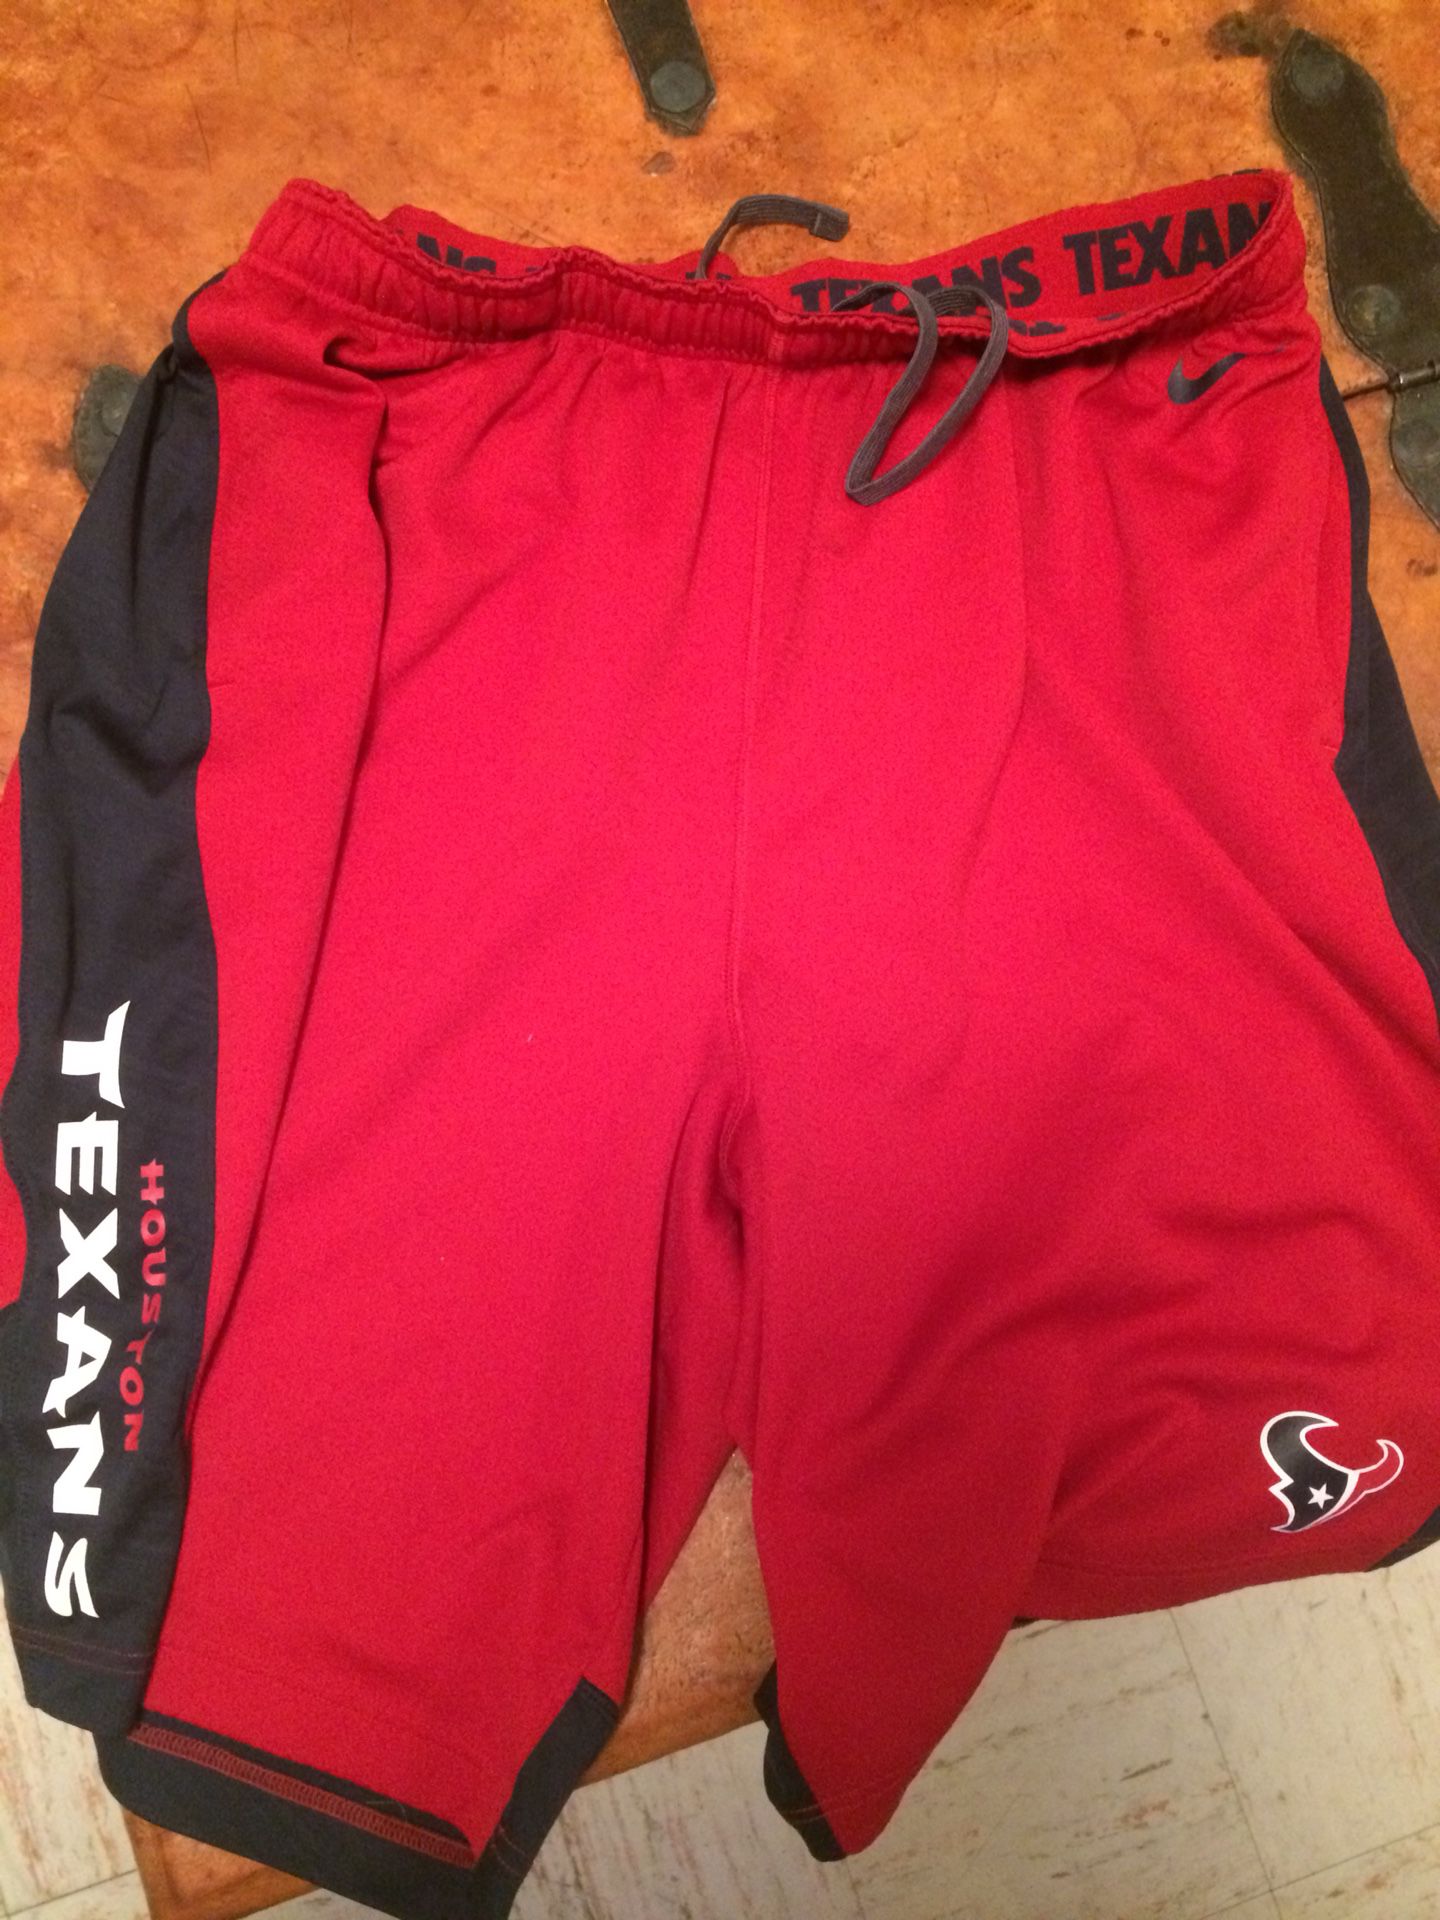 Texans training outfit